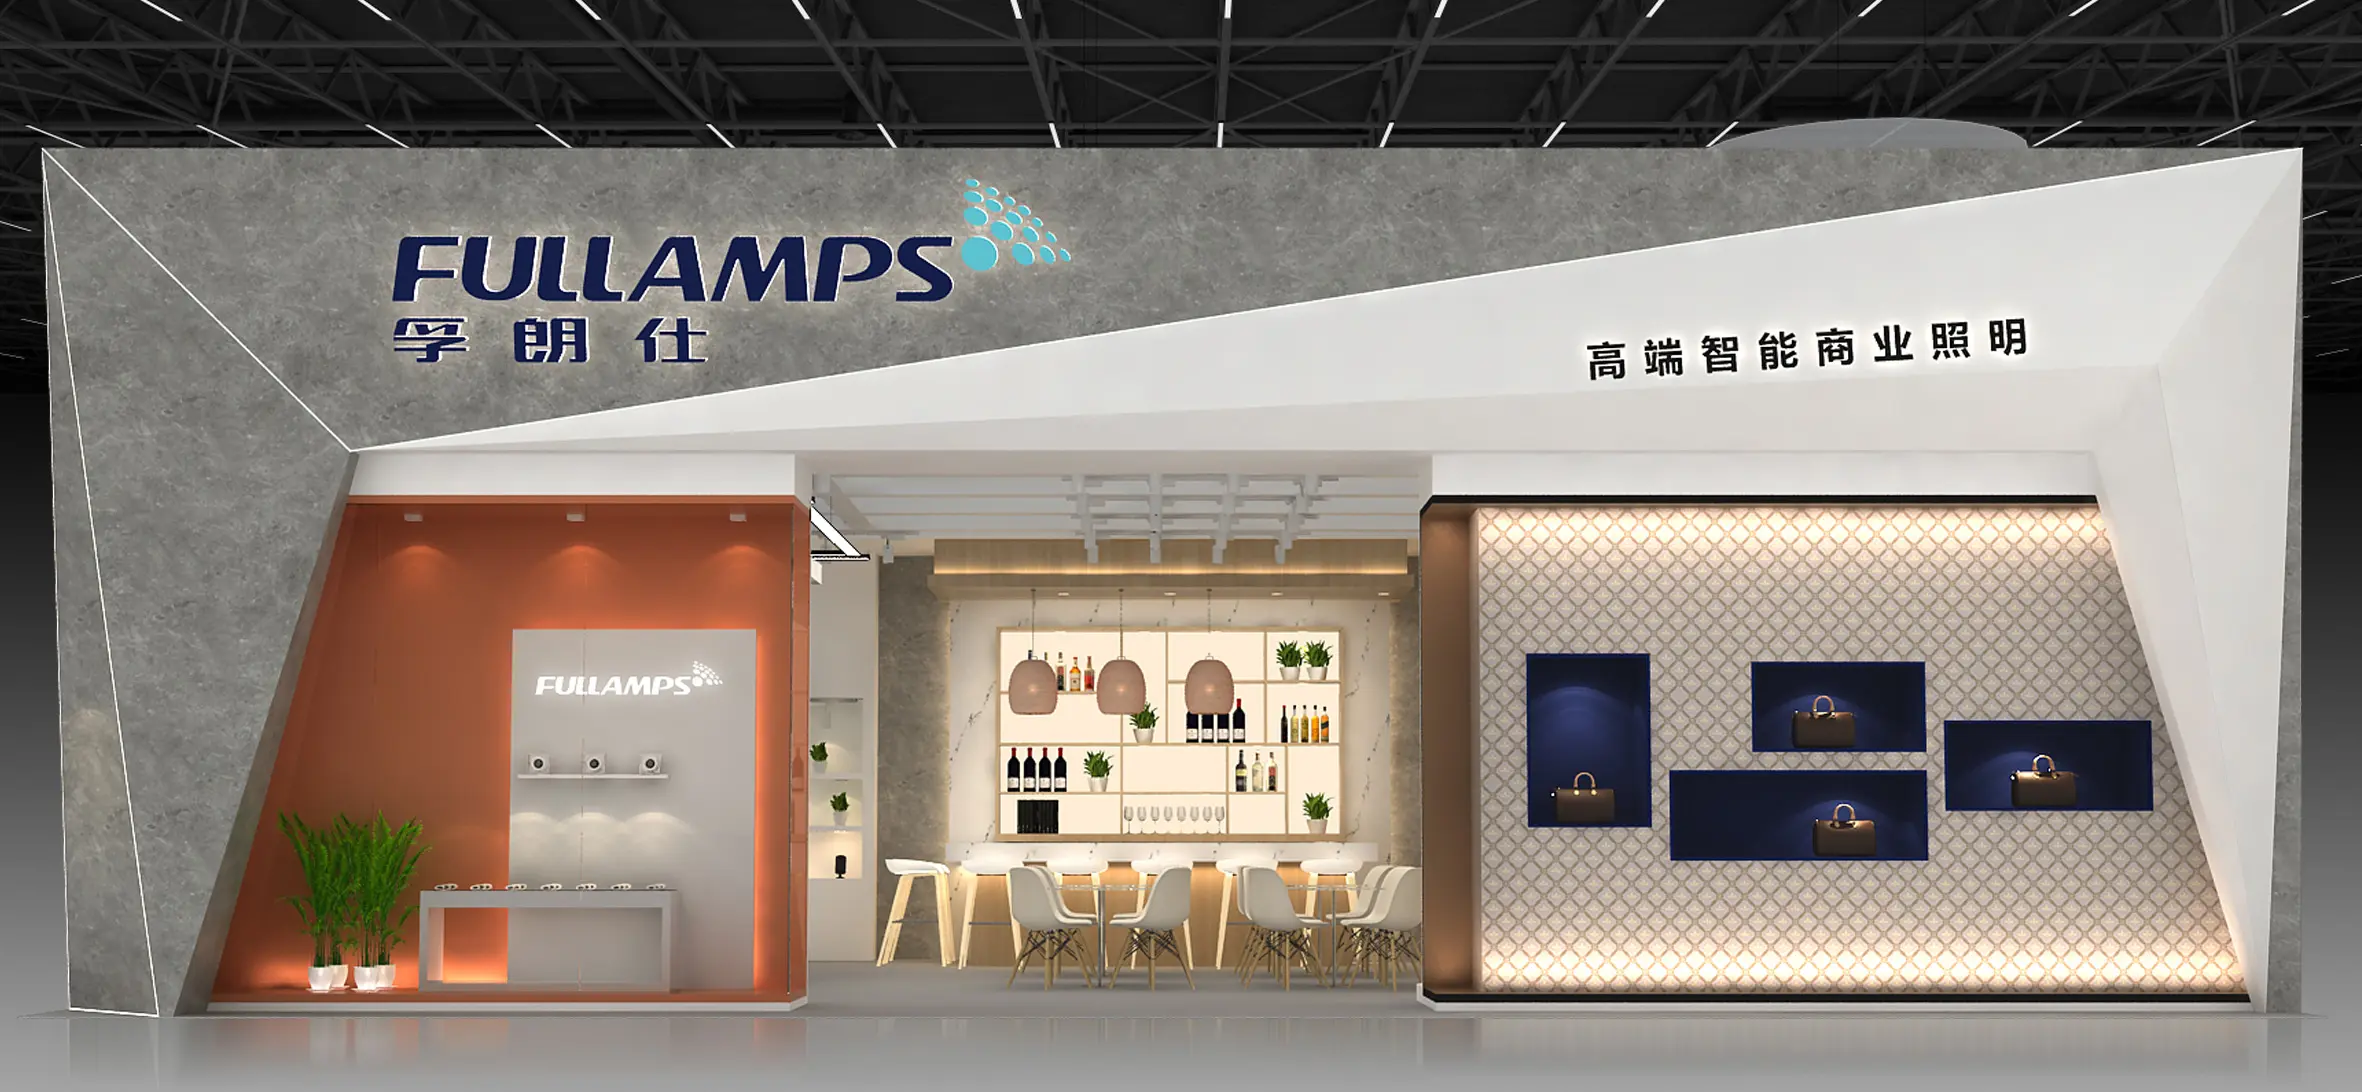 You are the most welcome to visit us in guangzhou lighting exhibition